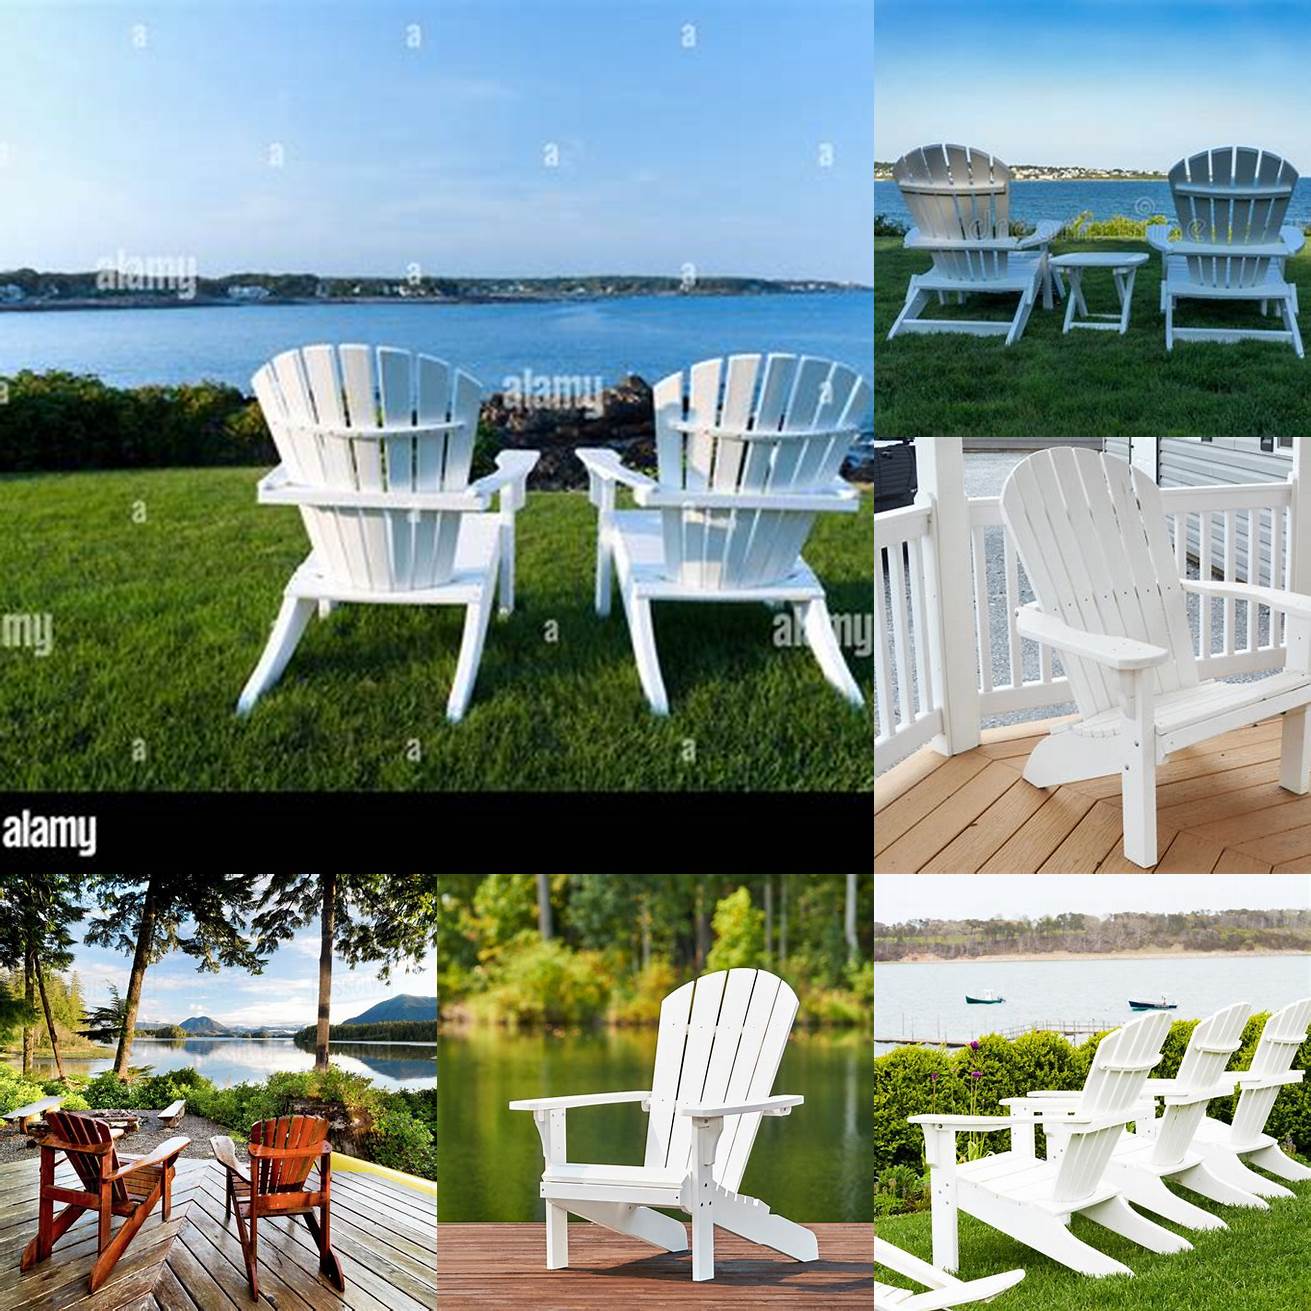 A row of white Adirondack chairs on a deck overlooking the ocean